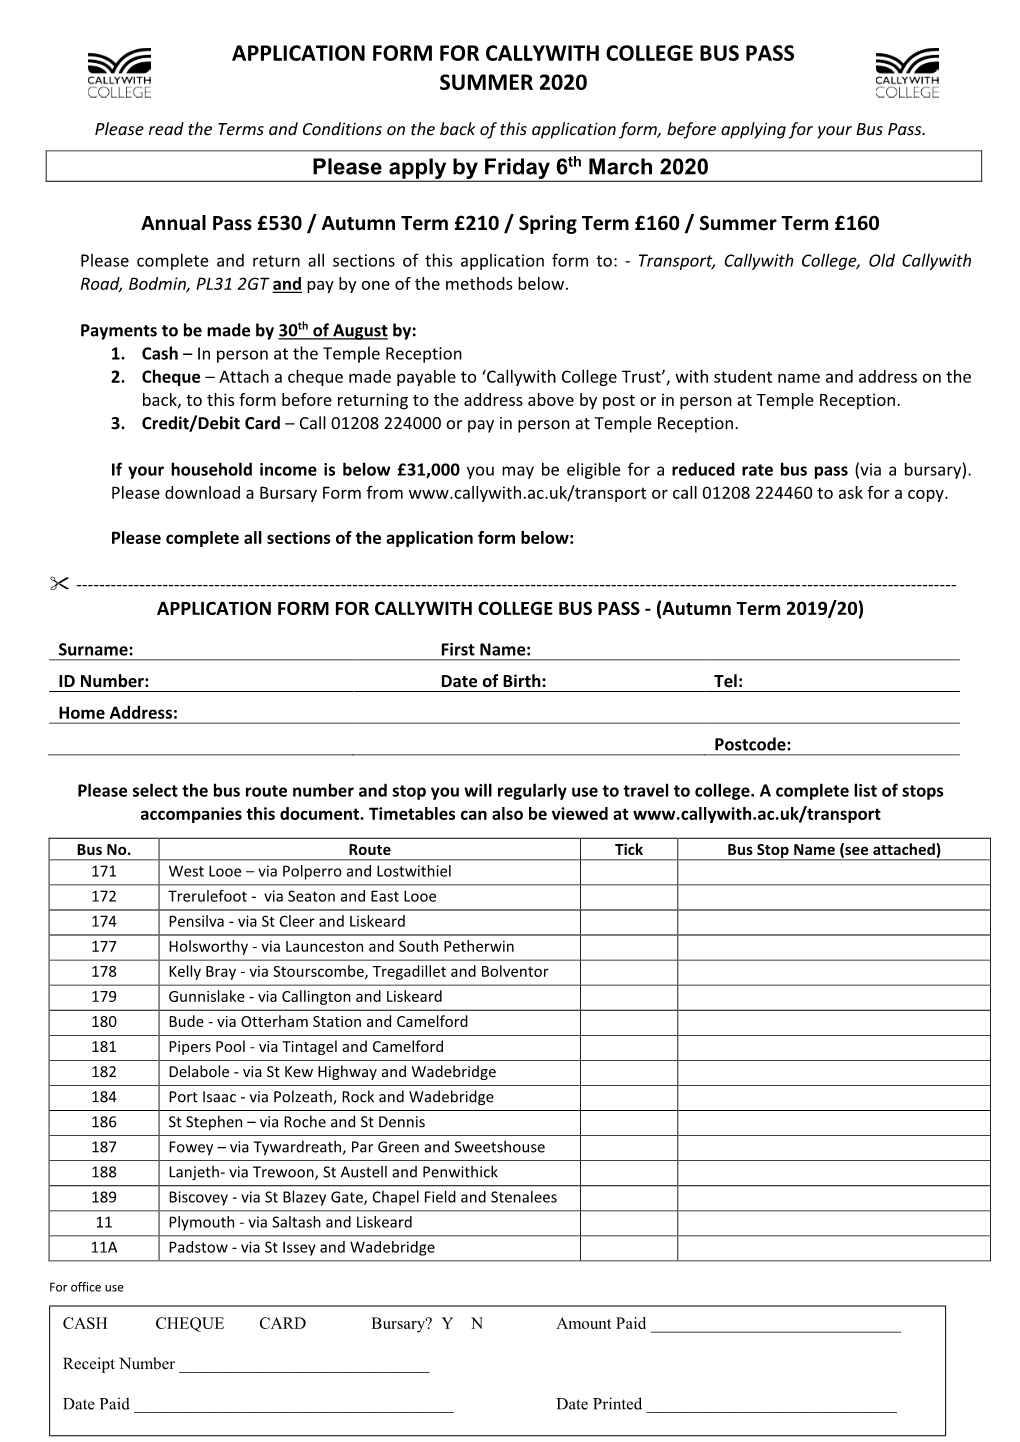 Application Form for Callywith College Bus Pass Summer 2020